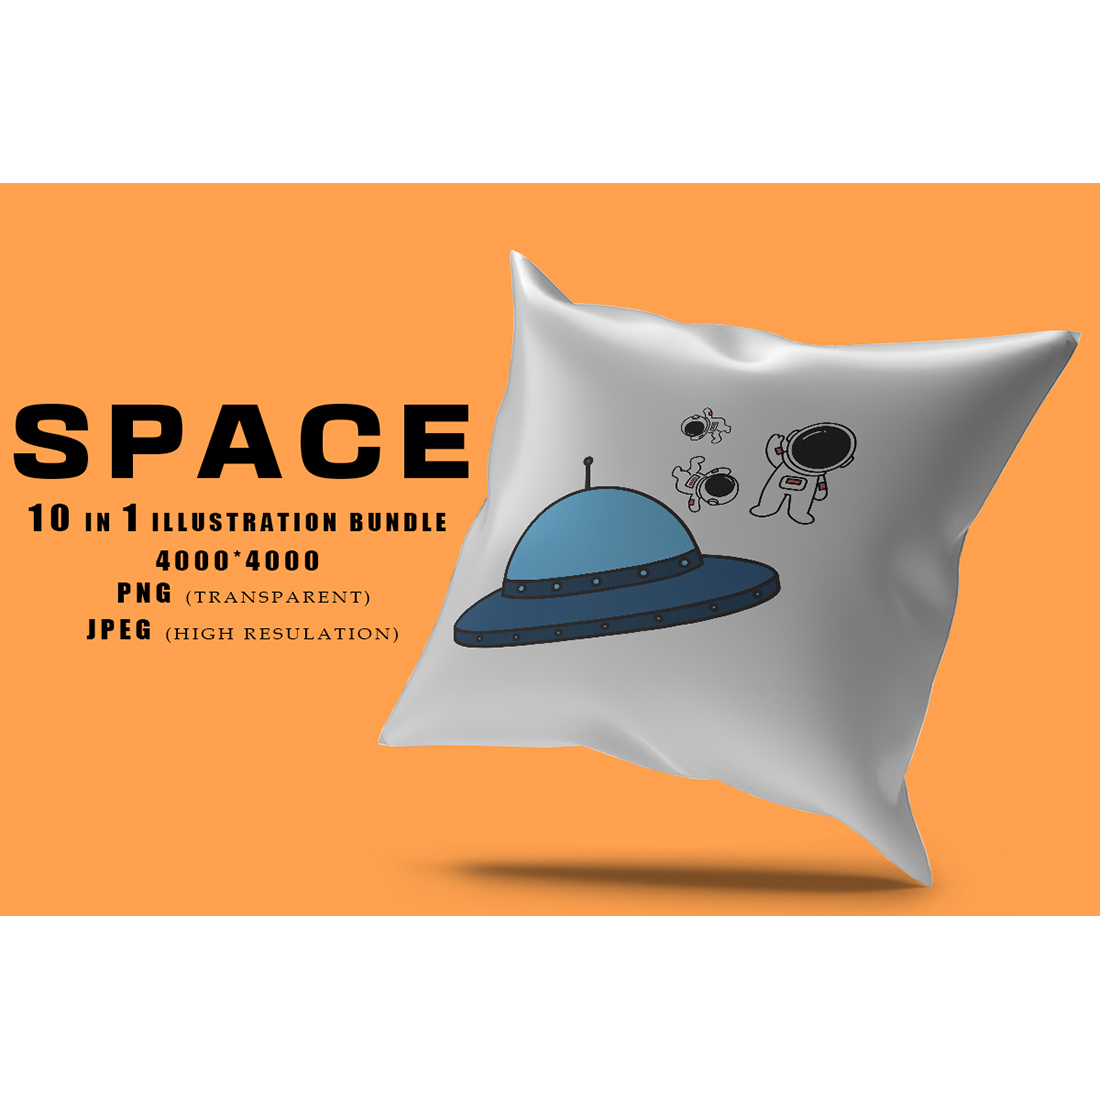 Image of a pillow with an enchanting print on the theme of space